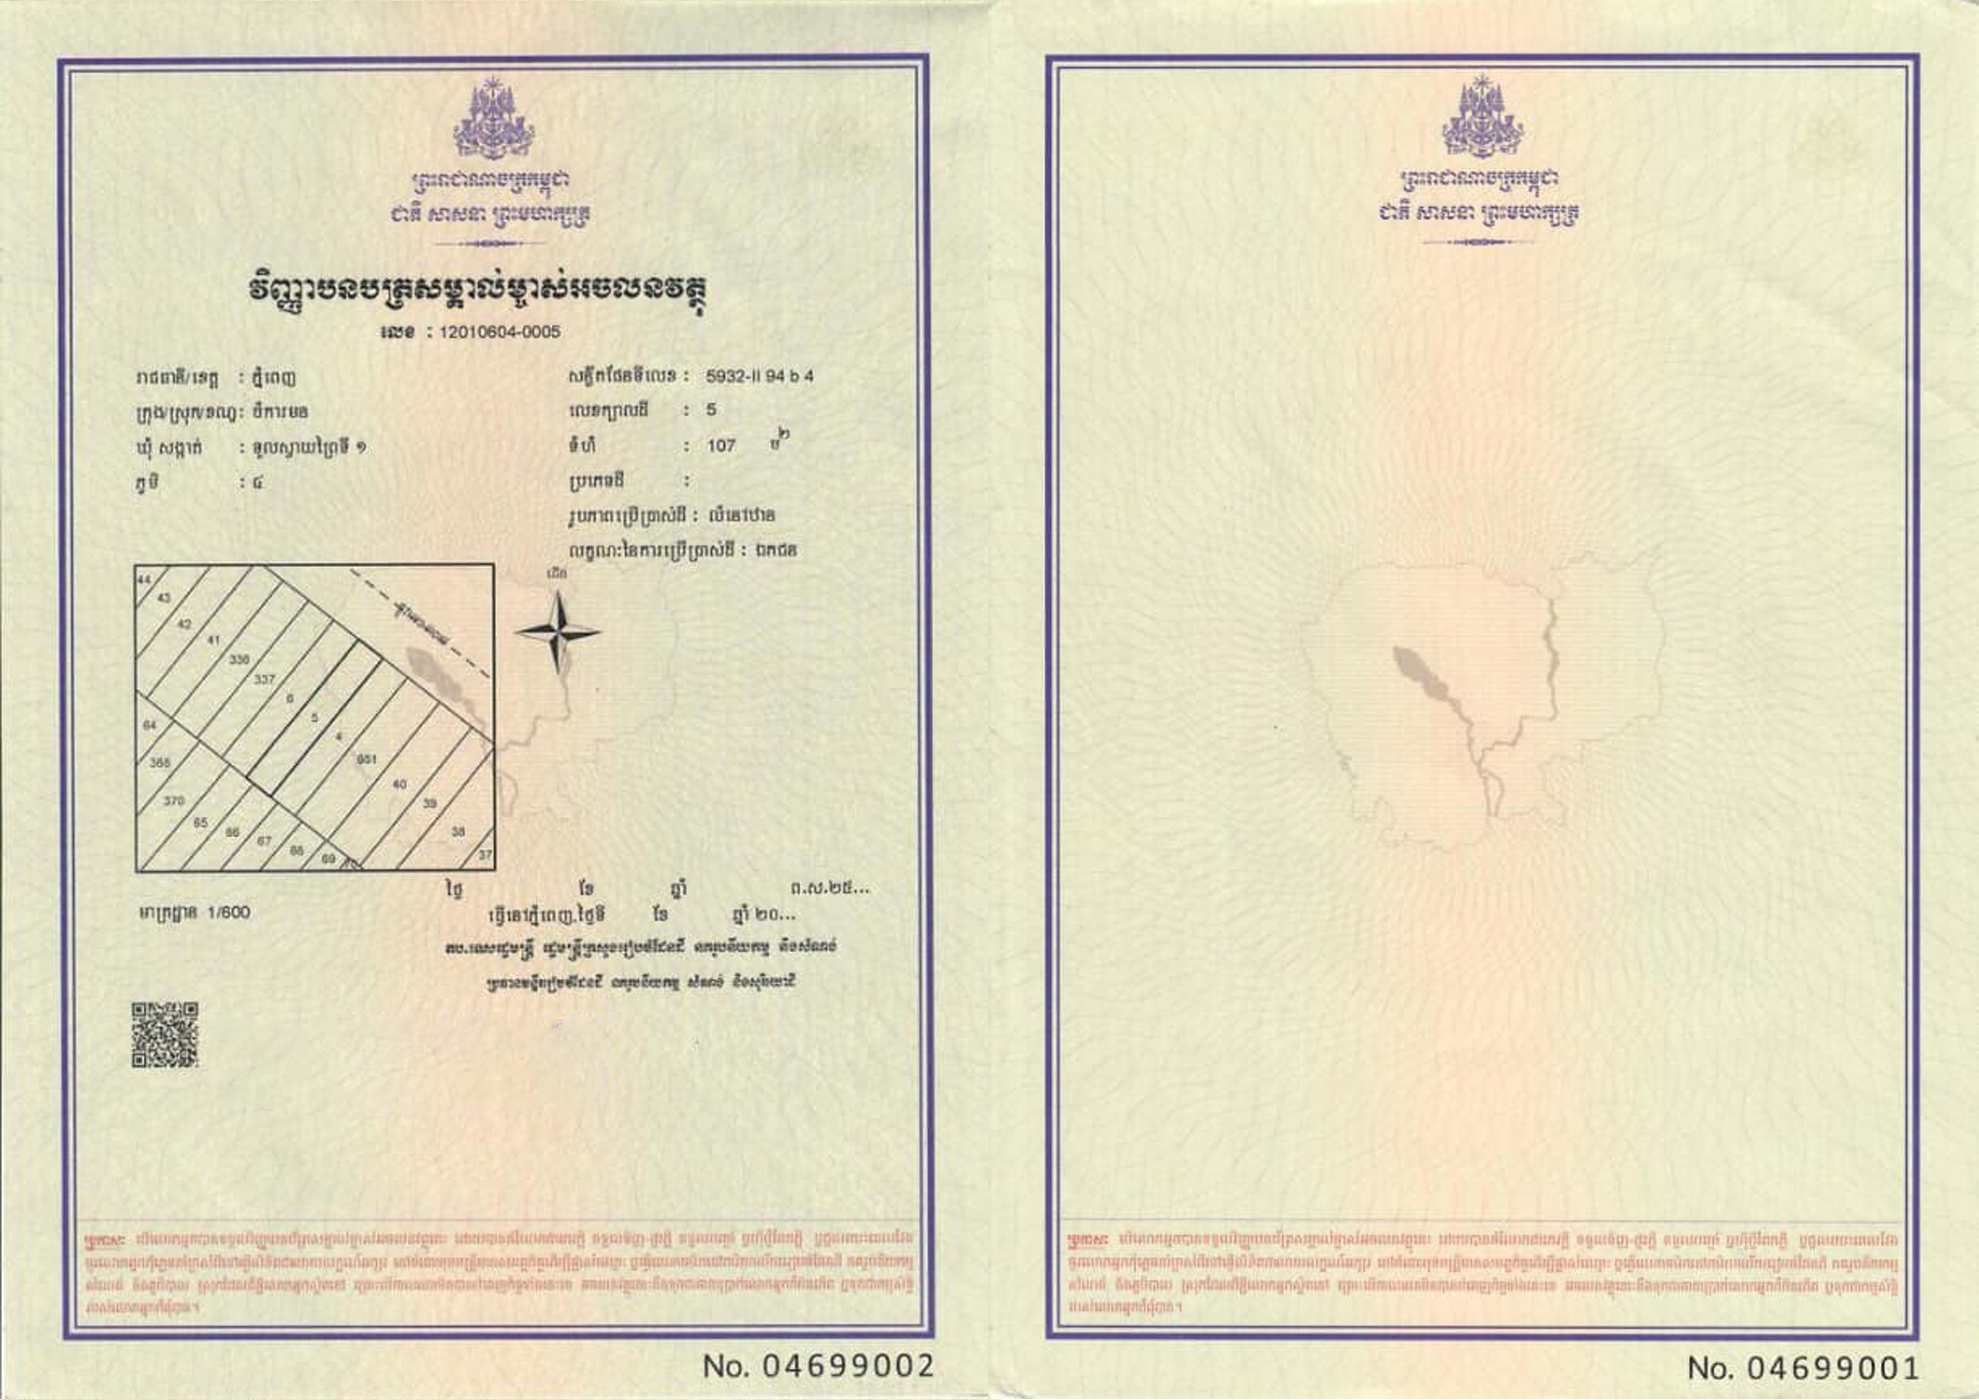 The Most Important Property Ownership Documents in Cambodia